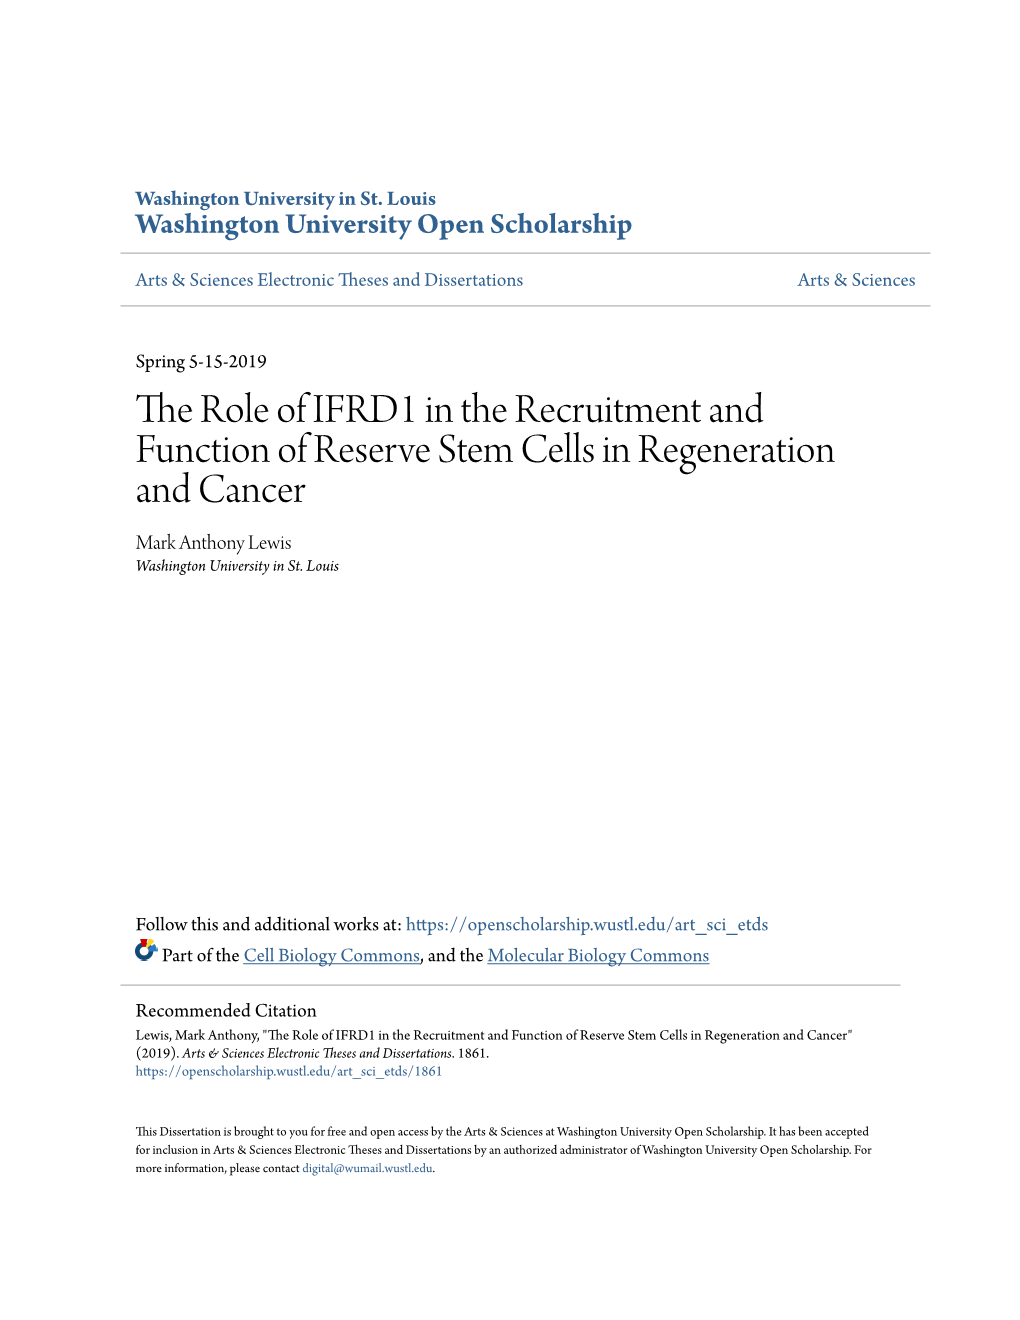 The Role of IFRD1 in the Recruitment and Function of Reserve Stem Cells in Regeneration and Cancer Mark Anthony Lewis Washington University in St